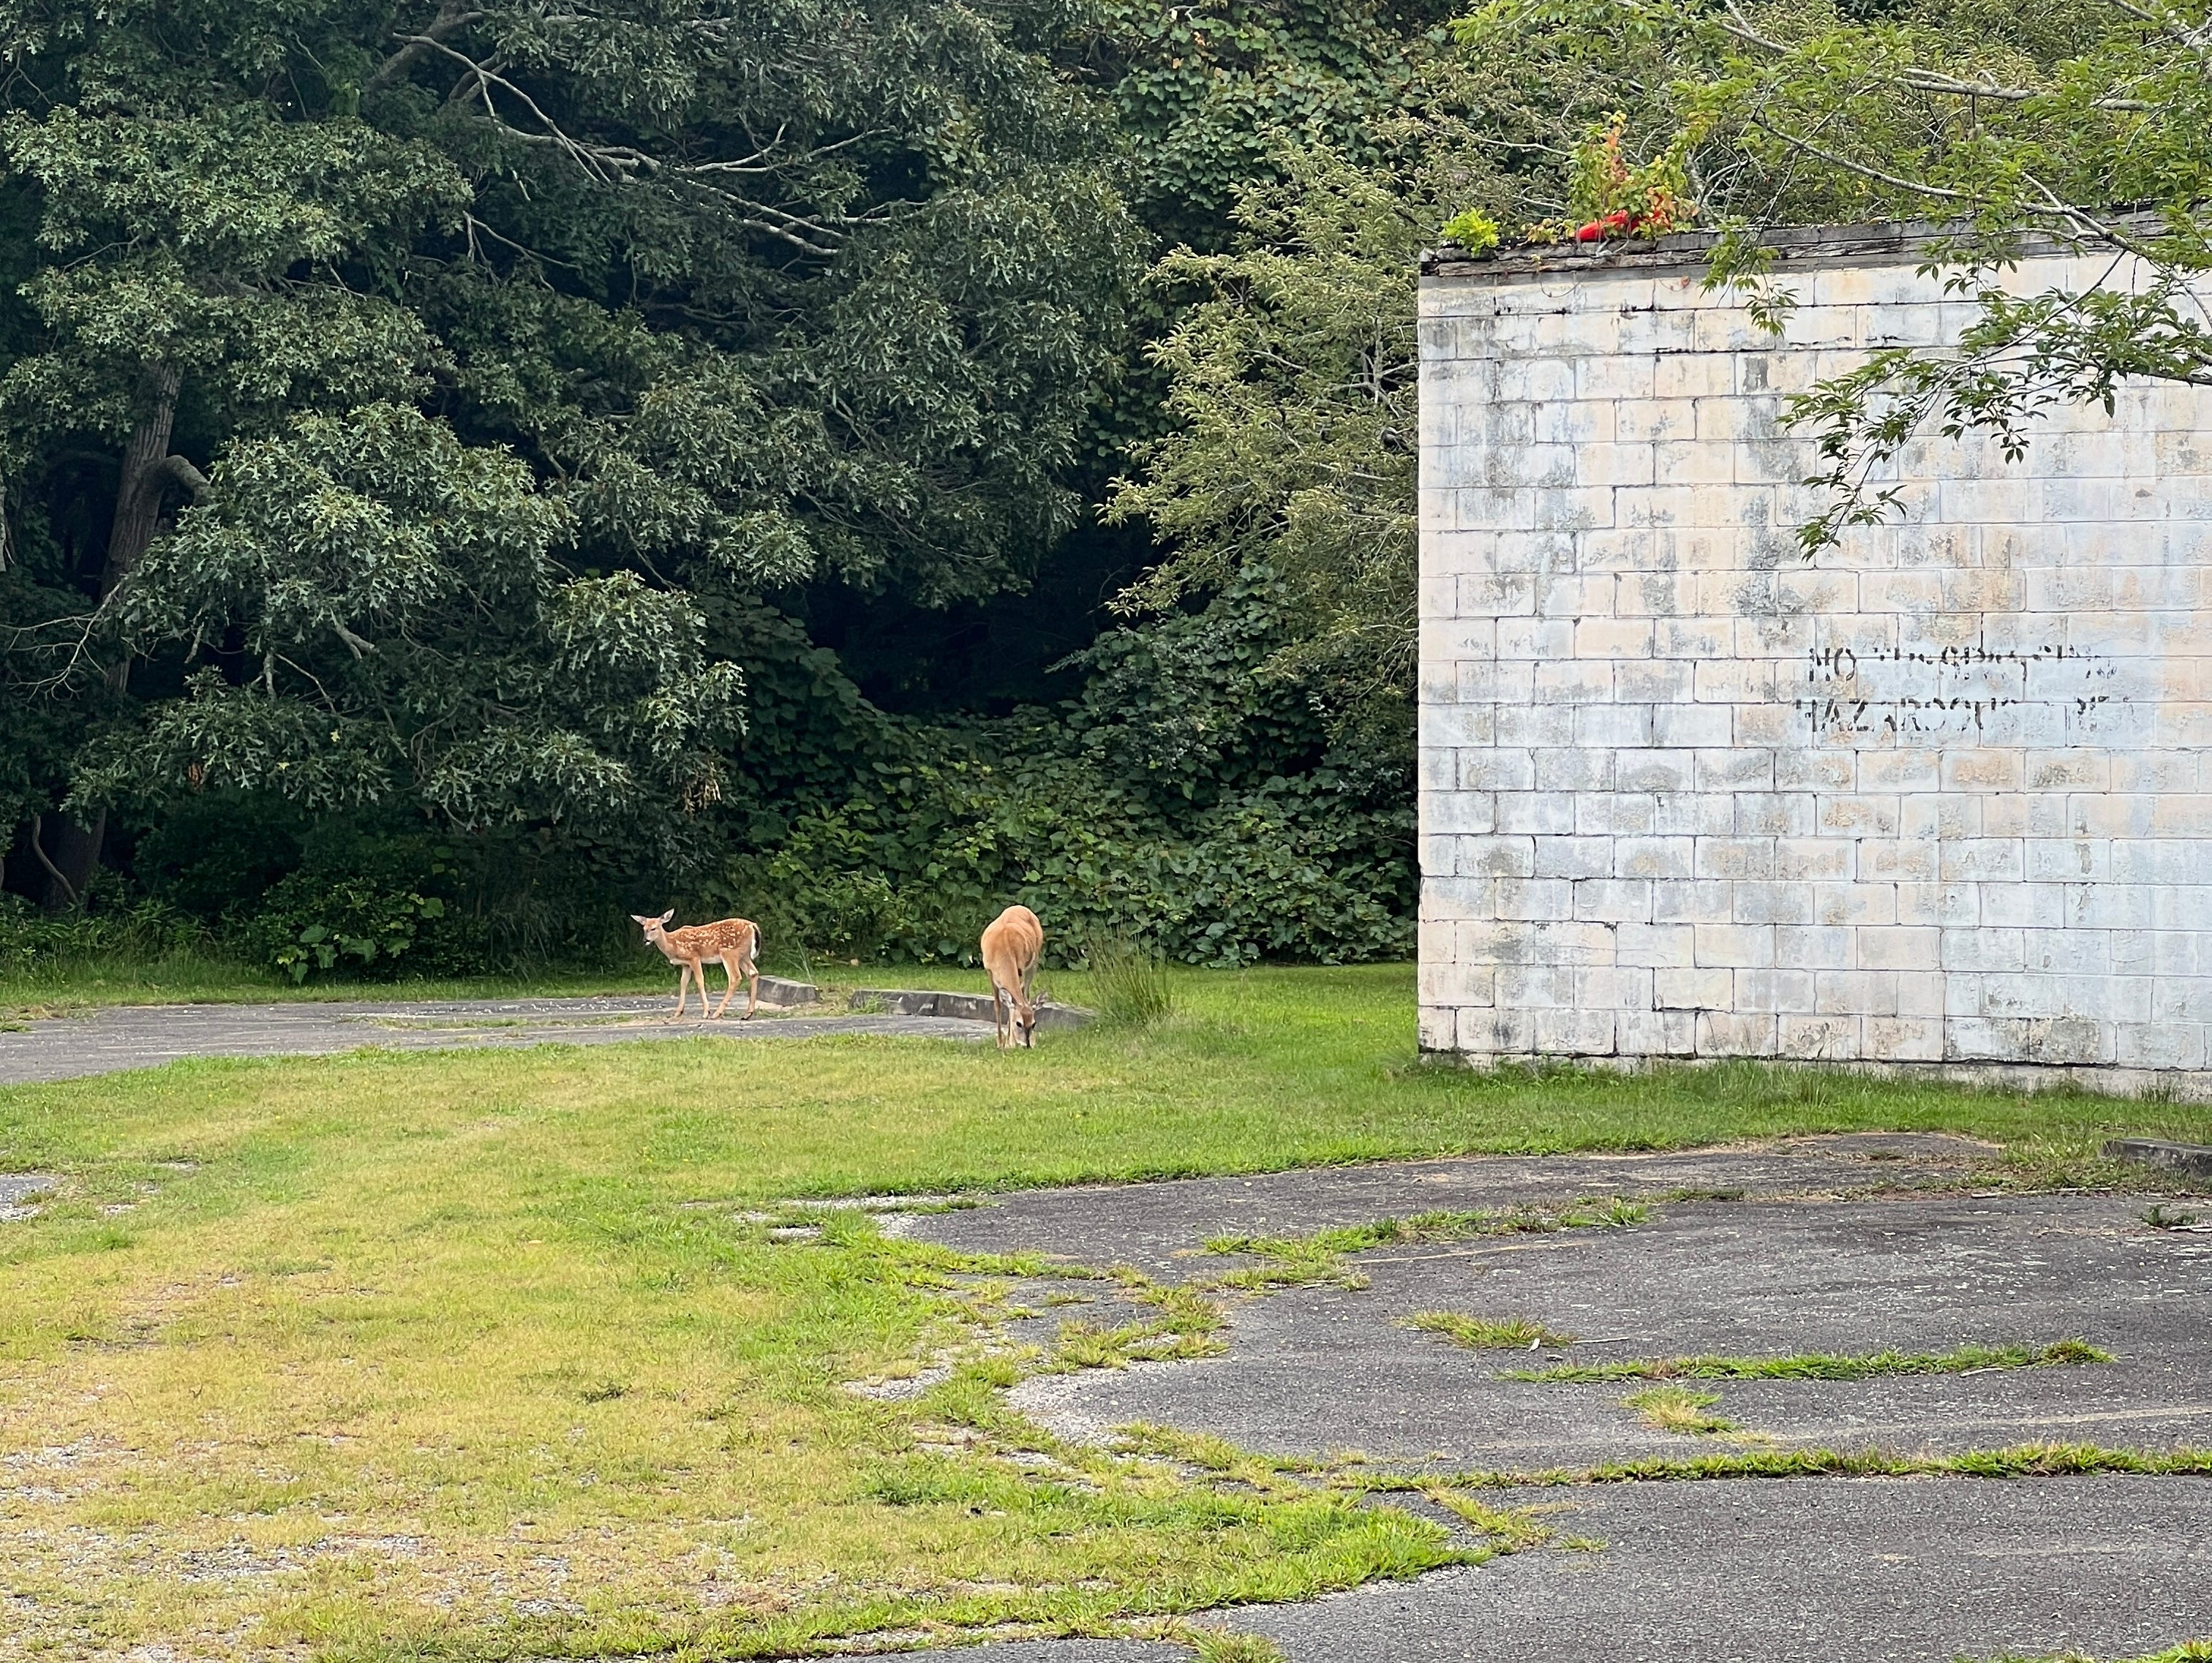 <p>We didn't want to scare the deer away, so we kept our distance while exploring the buildings.</p>